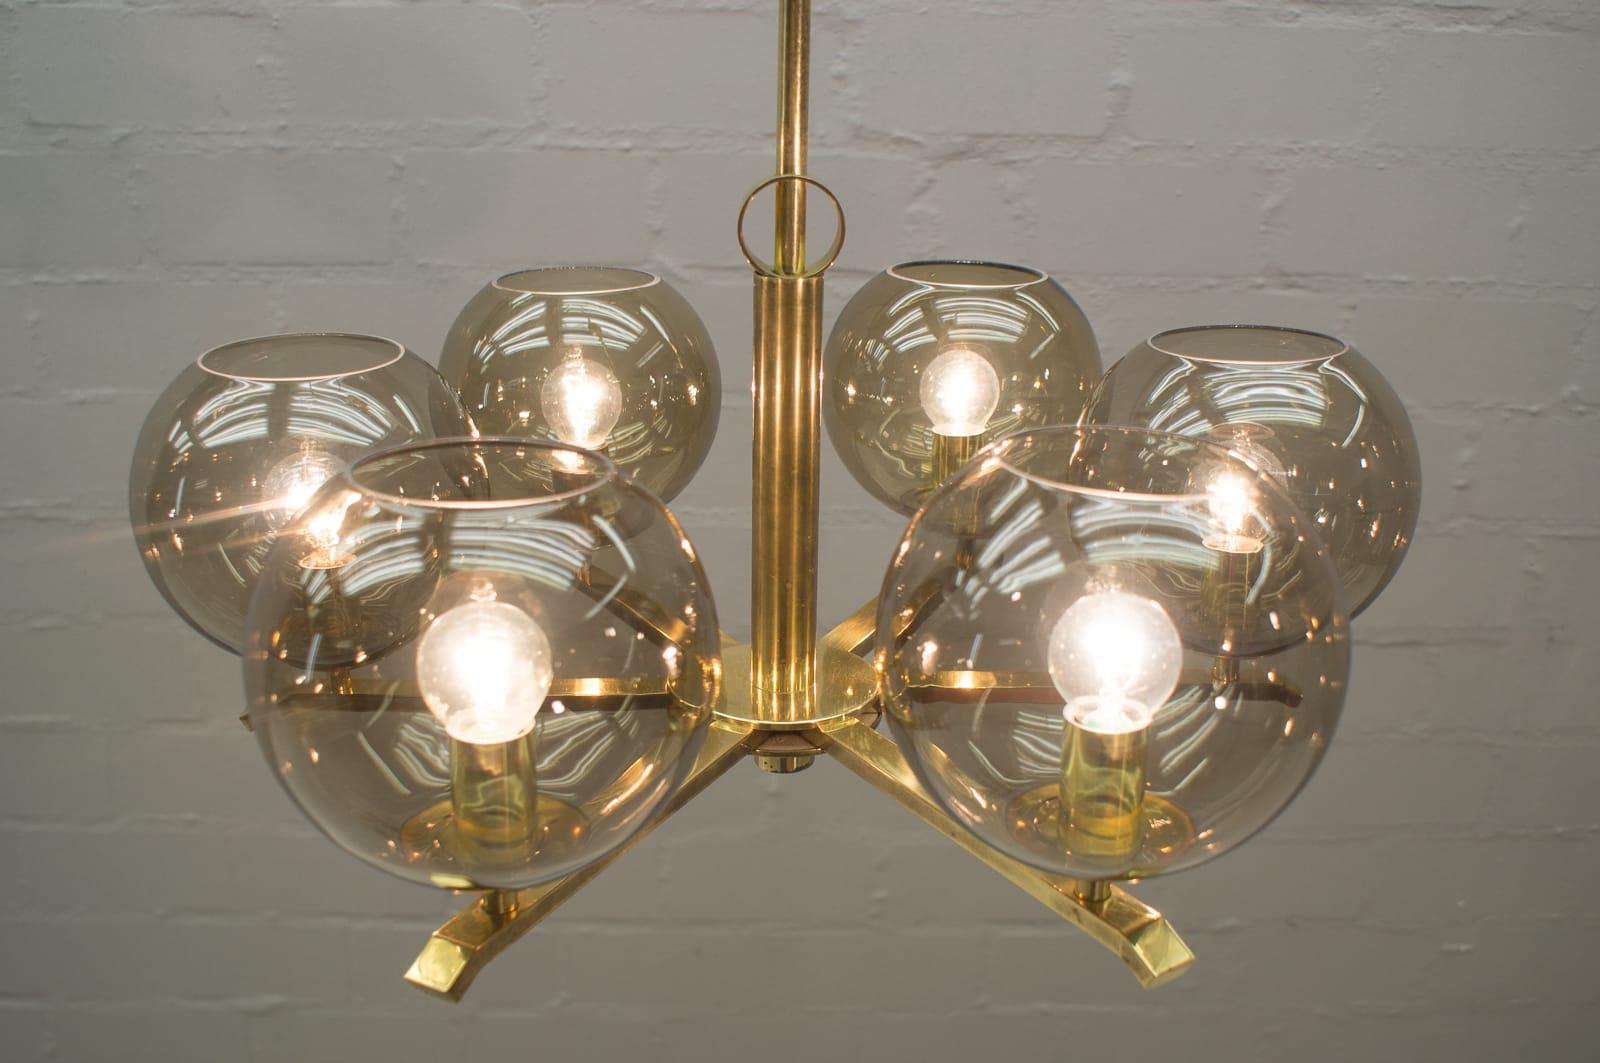 Elegant 1960s Brass Ceiling Lamp with 8 Smoked Glass Globes, Germany For Sale 3